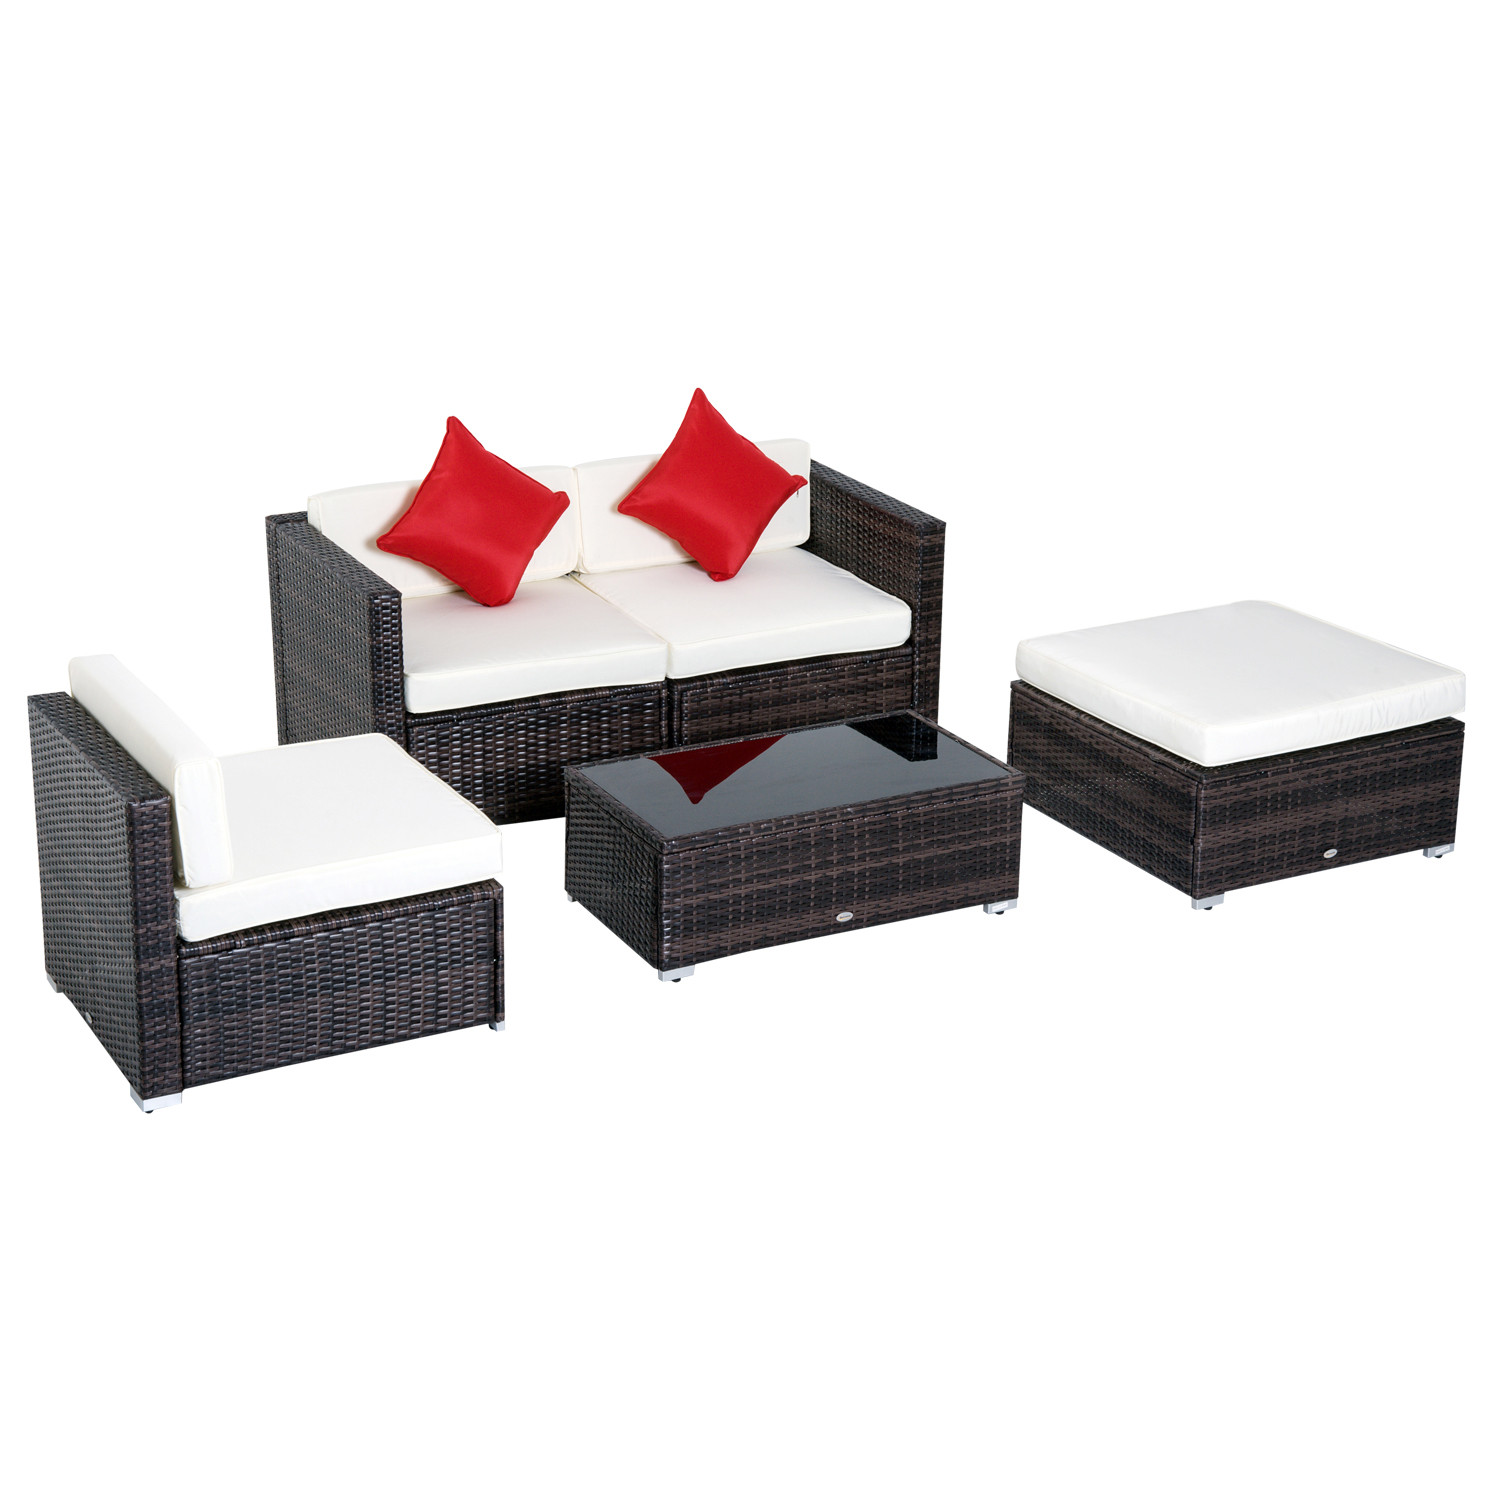 Online Gym Shop CB15460 Outdoor Patio PE Rattan Wicker Sofa Chaise Lounge Furniture - 5 Piece - image 3 of 10